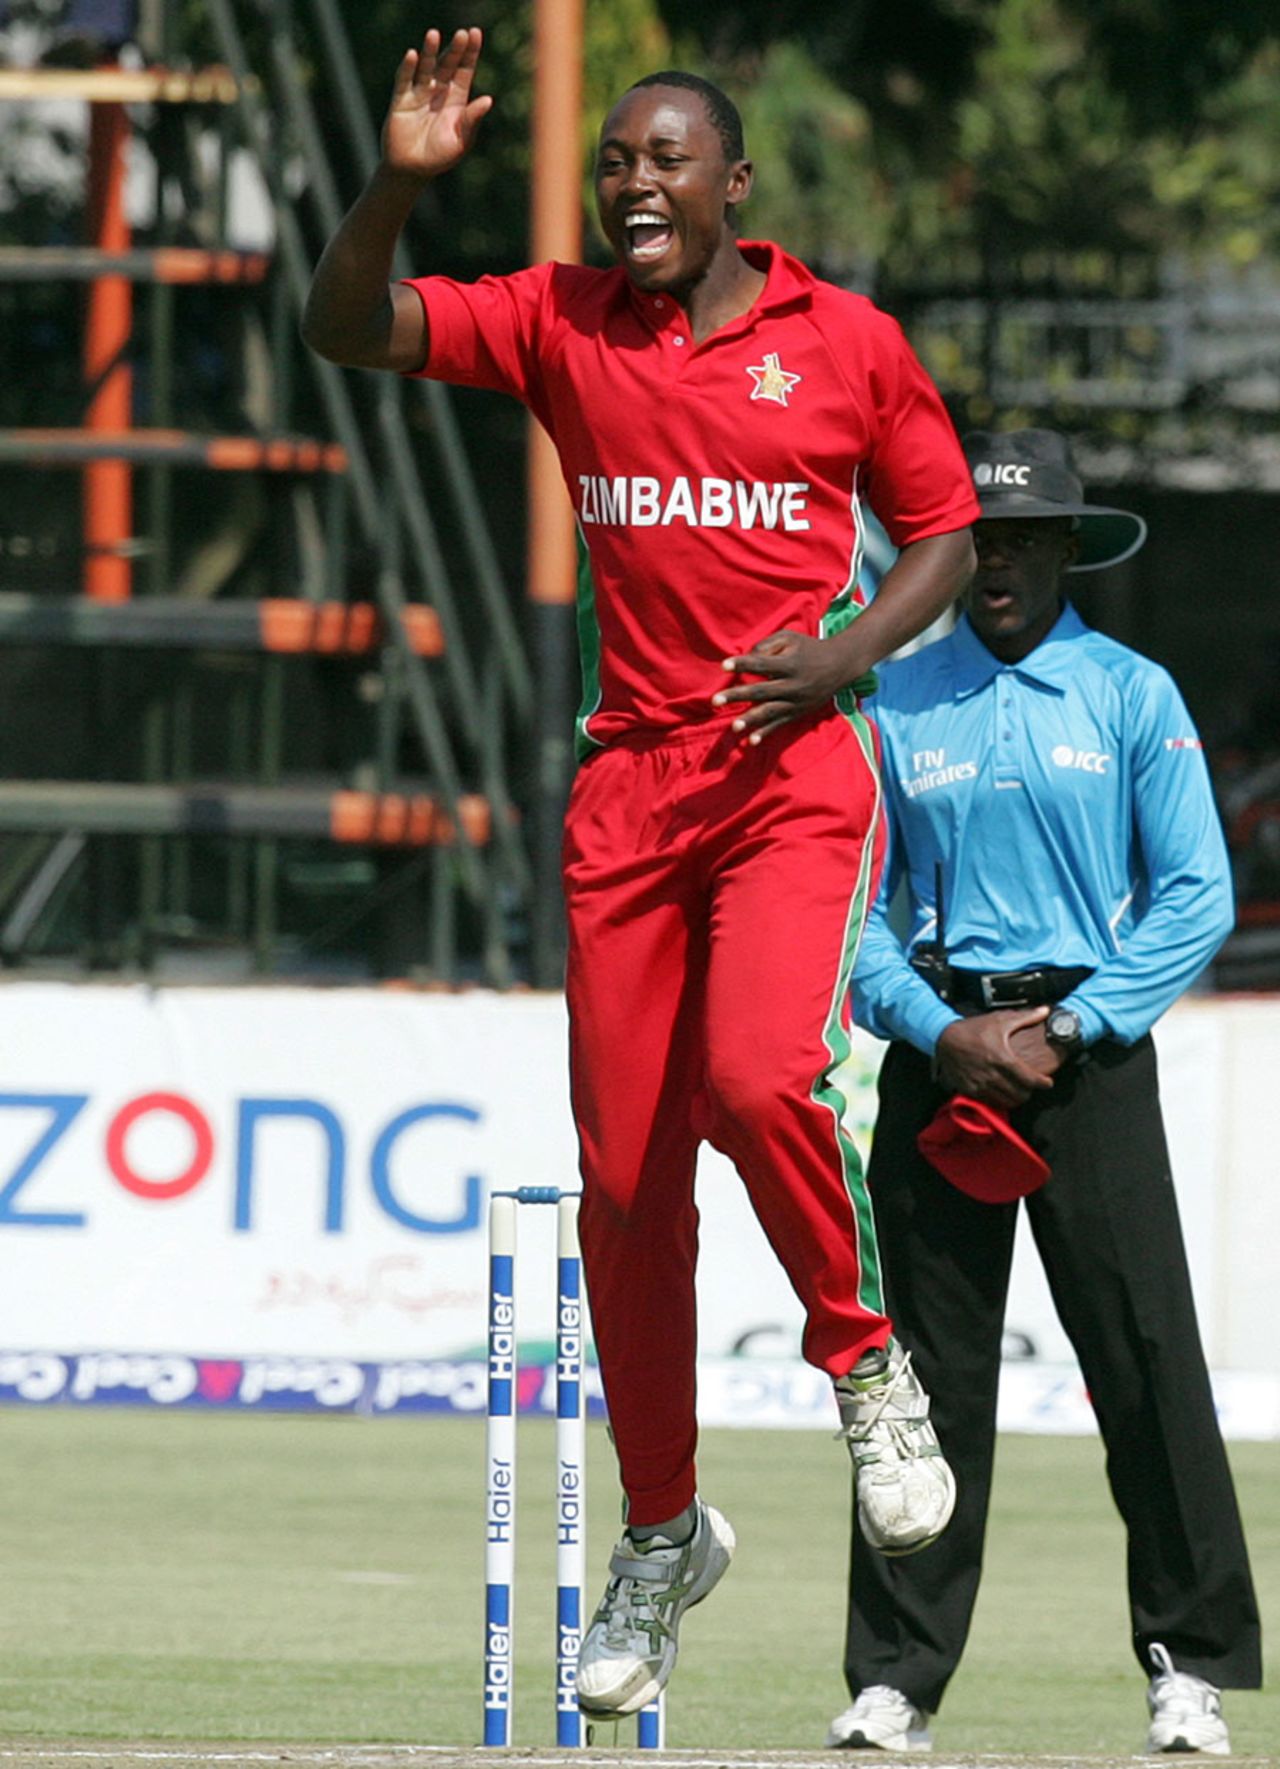 Tendai Chatara picked up two early wickets, Zimbabwe v Pakistan, 1st T20, Harare, August 23, 2013